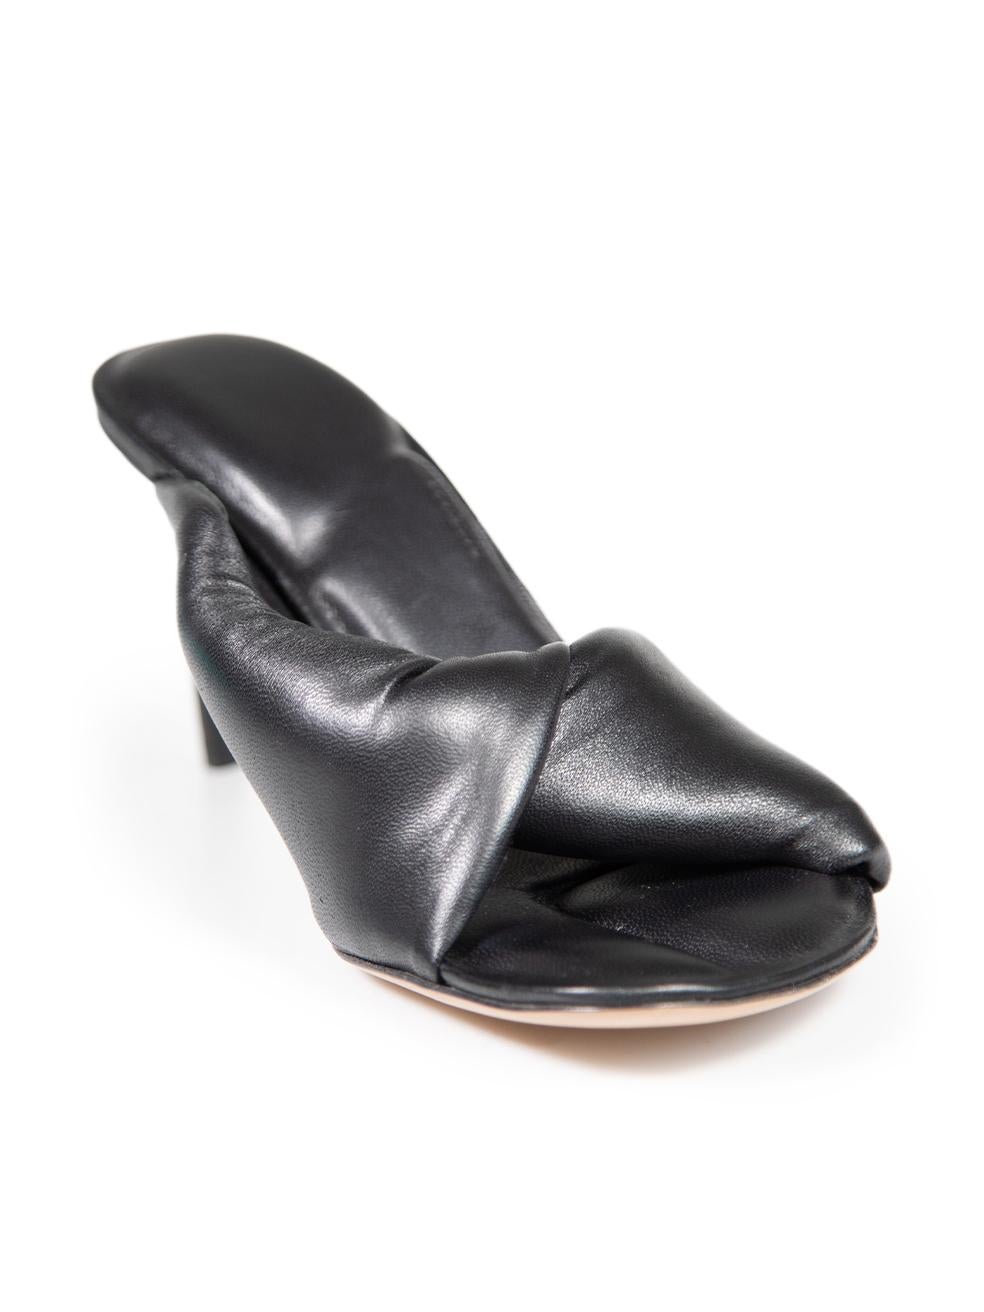 CONDITION is Very good. Minimal wear to mules is evident. Minimal abrasion to right side and left edge of left shoe as well as a scratch on left heel on this used Jacquemus designer resale item.
 
 
 
 Details
 
 
 Black
 
 Leather
 
 Mules
 
 Open